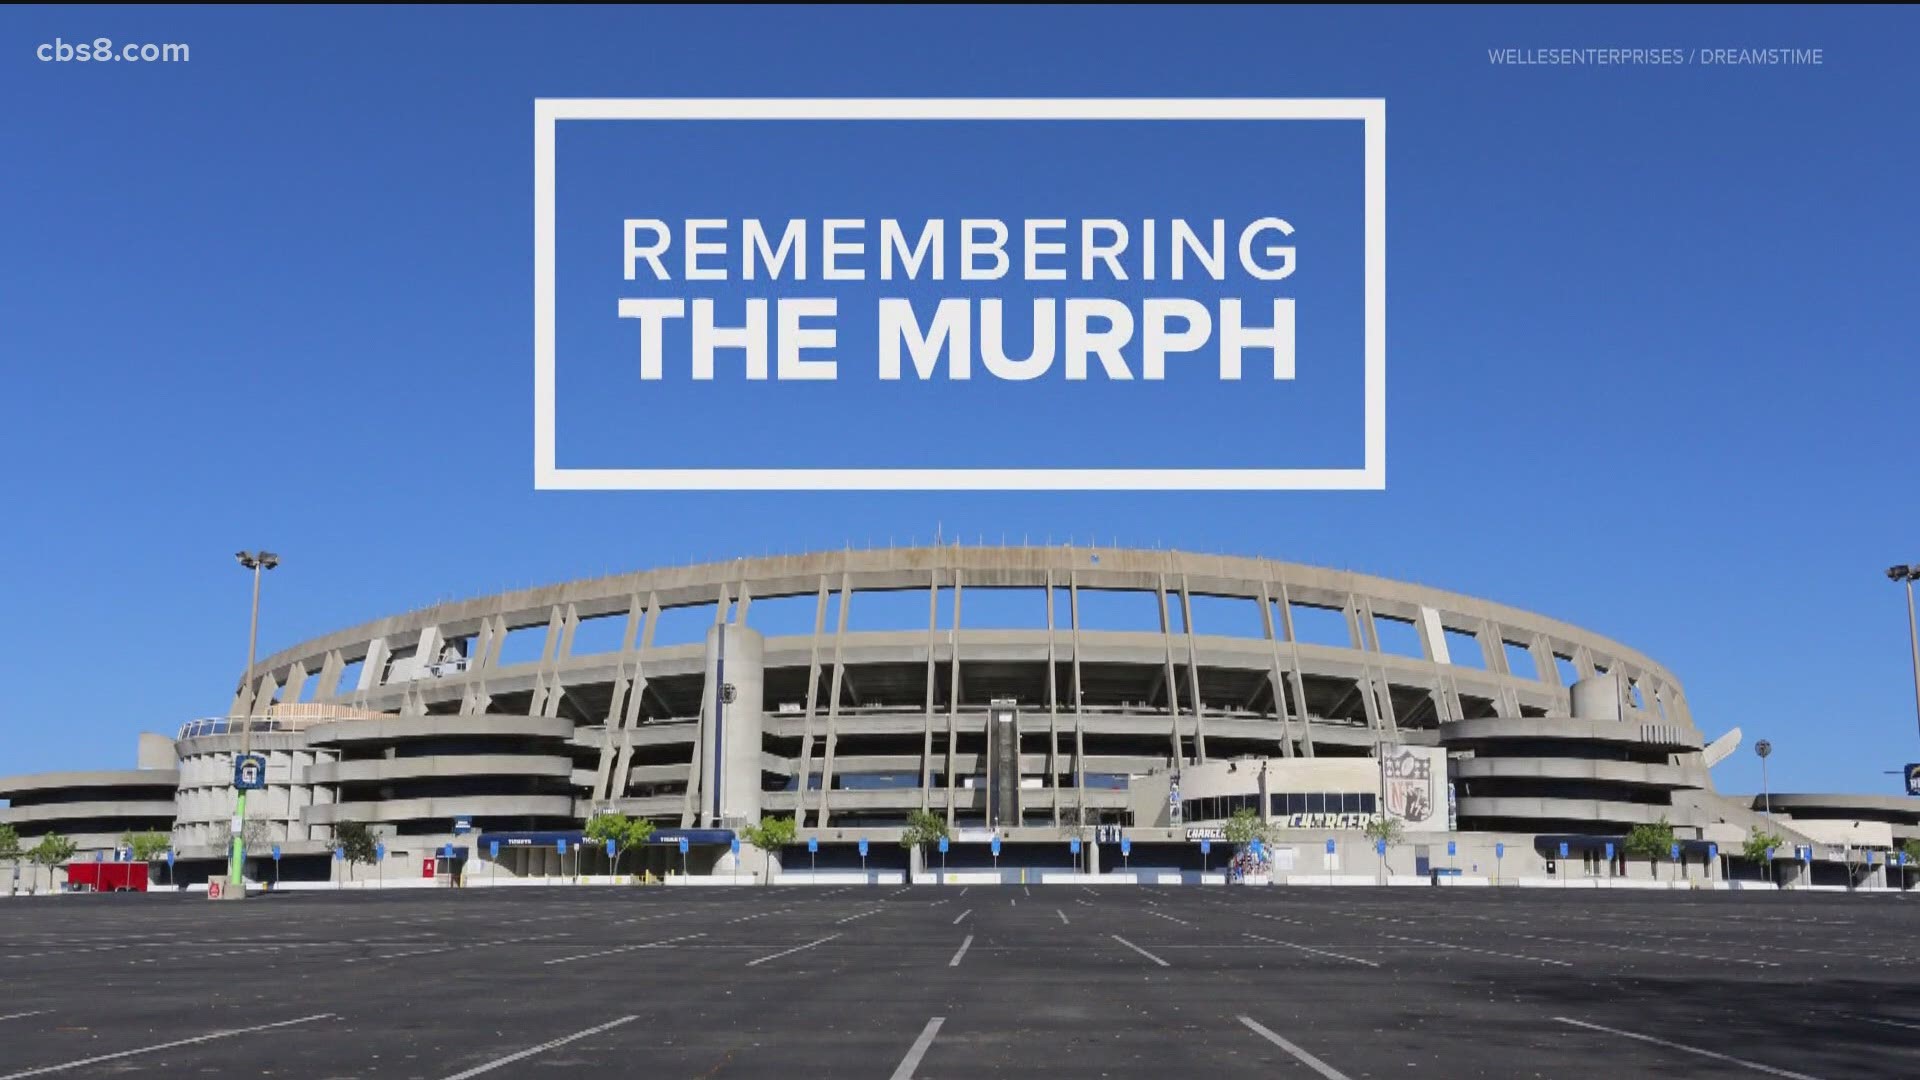 The former Chargers quarterback reminisced with our News 8 Sports Director Kyle Kraska about his memories of the "Murph" during his 15-year career.